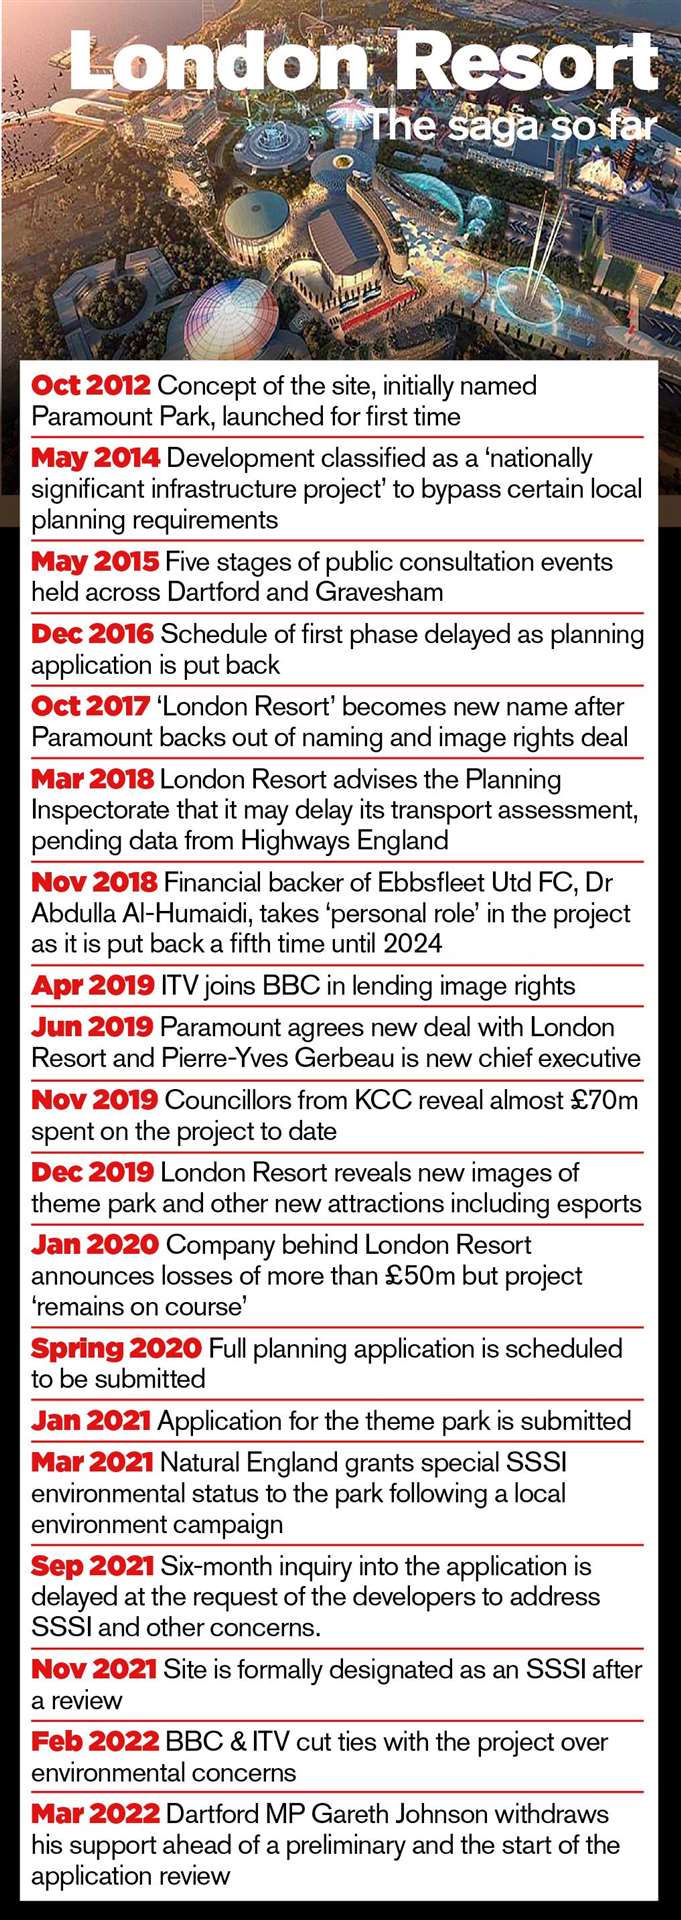 A timeline of key events regarding proposals for the London Resort theme park in Kent between 2012 and 2022.